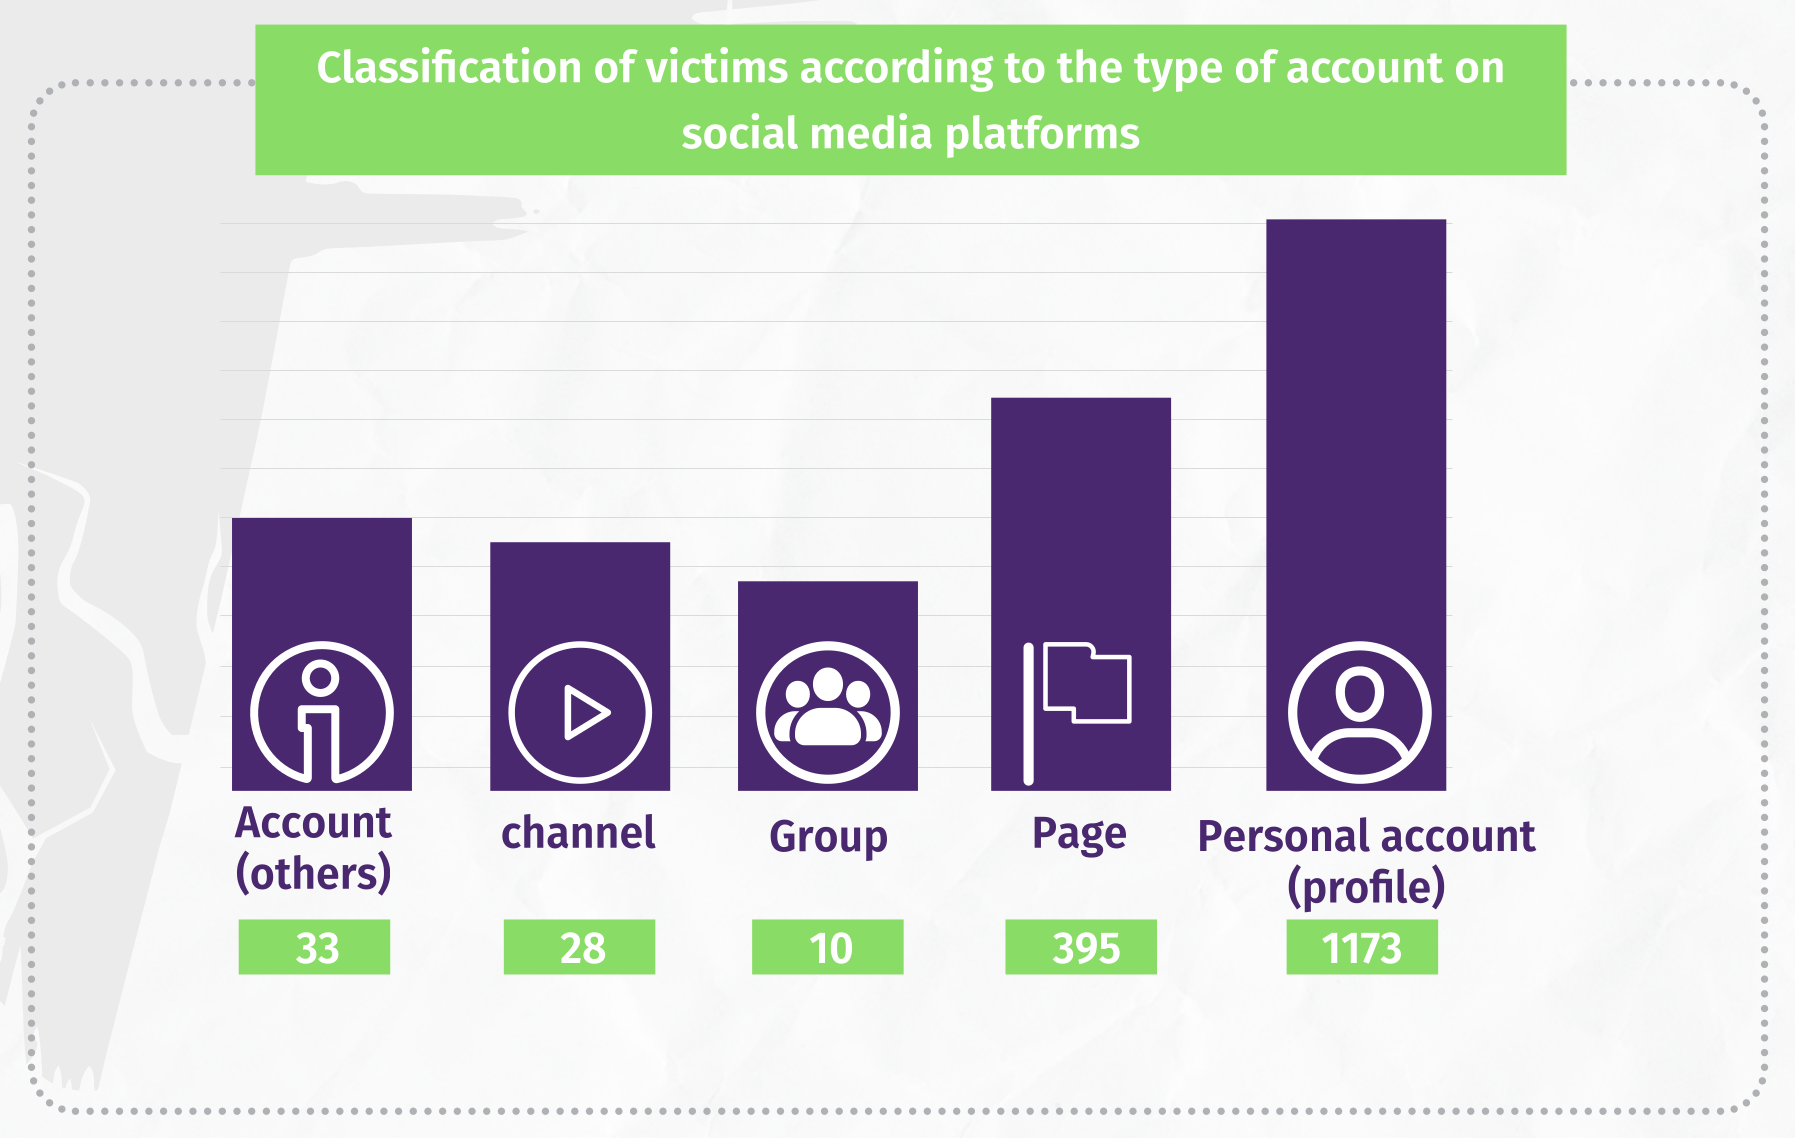 Classification of victims according to the type of account on social media platforms. Image courtesy of 7amleh.